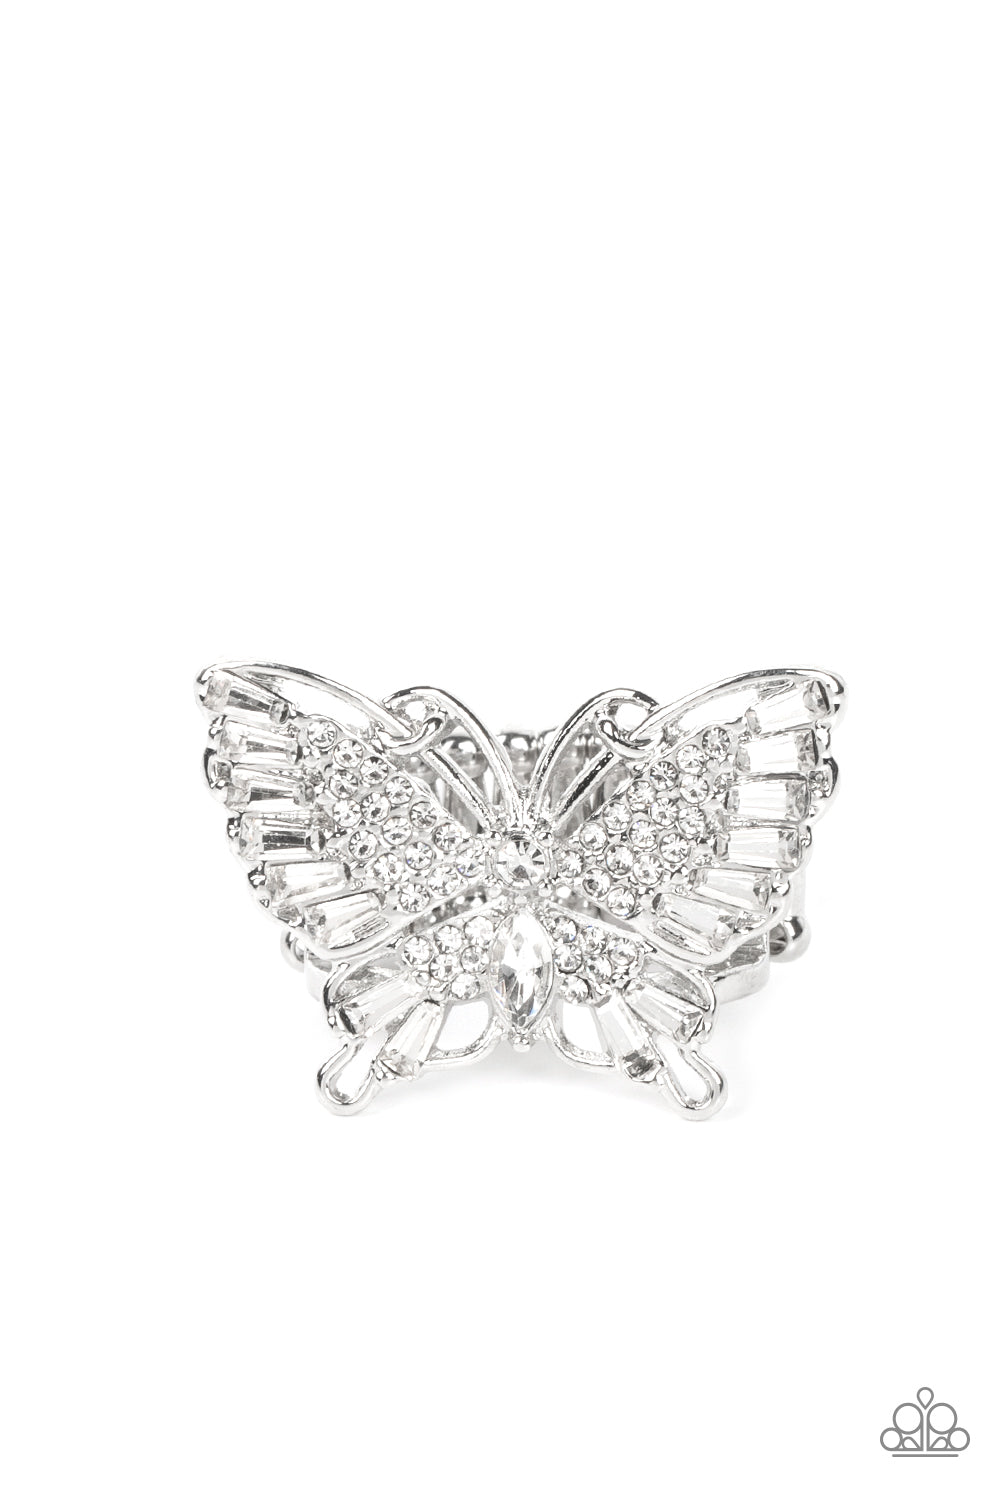 Fearless Flutter - White and Silver Butterfly Ring - Paparazzi Accessories -Sparkling with round, teardrop, and emerald cut white rhinestones, a silver butterfly fearlessly flutters atop the finger for a statement-making finish. Features a stretchy band for a flexible fit.  Bejeweled Accessories By Kristie - Trendy fashion jewelry for everyone -